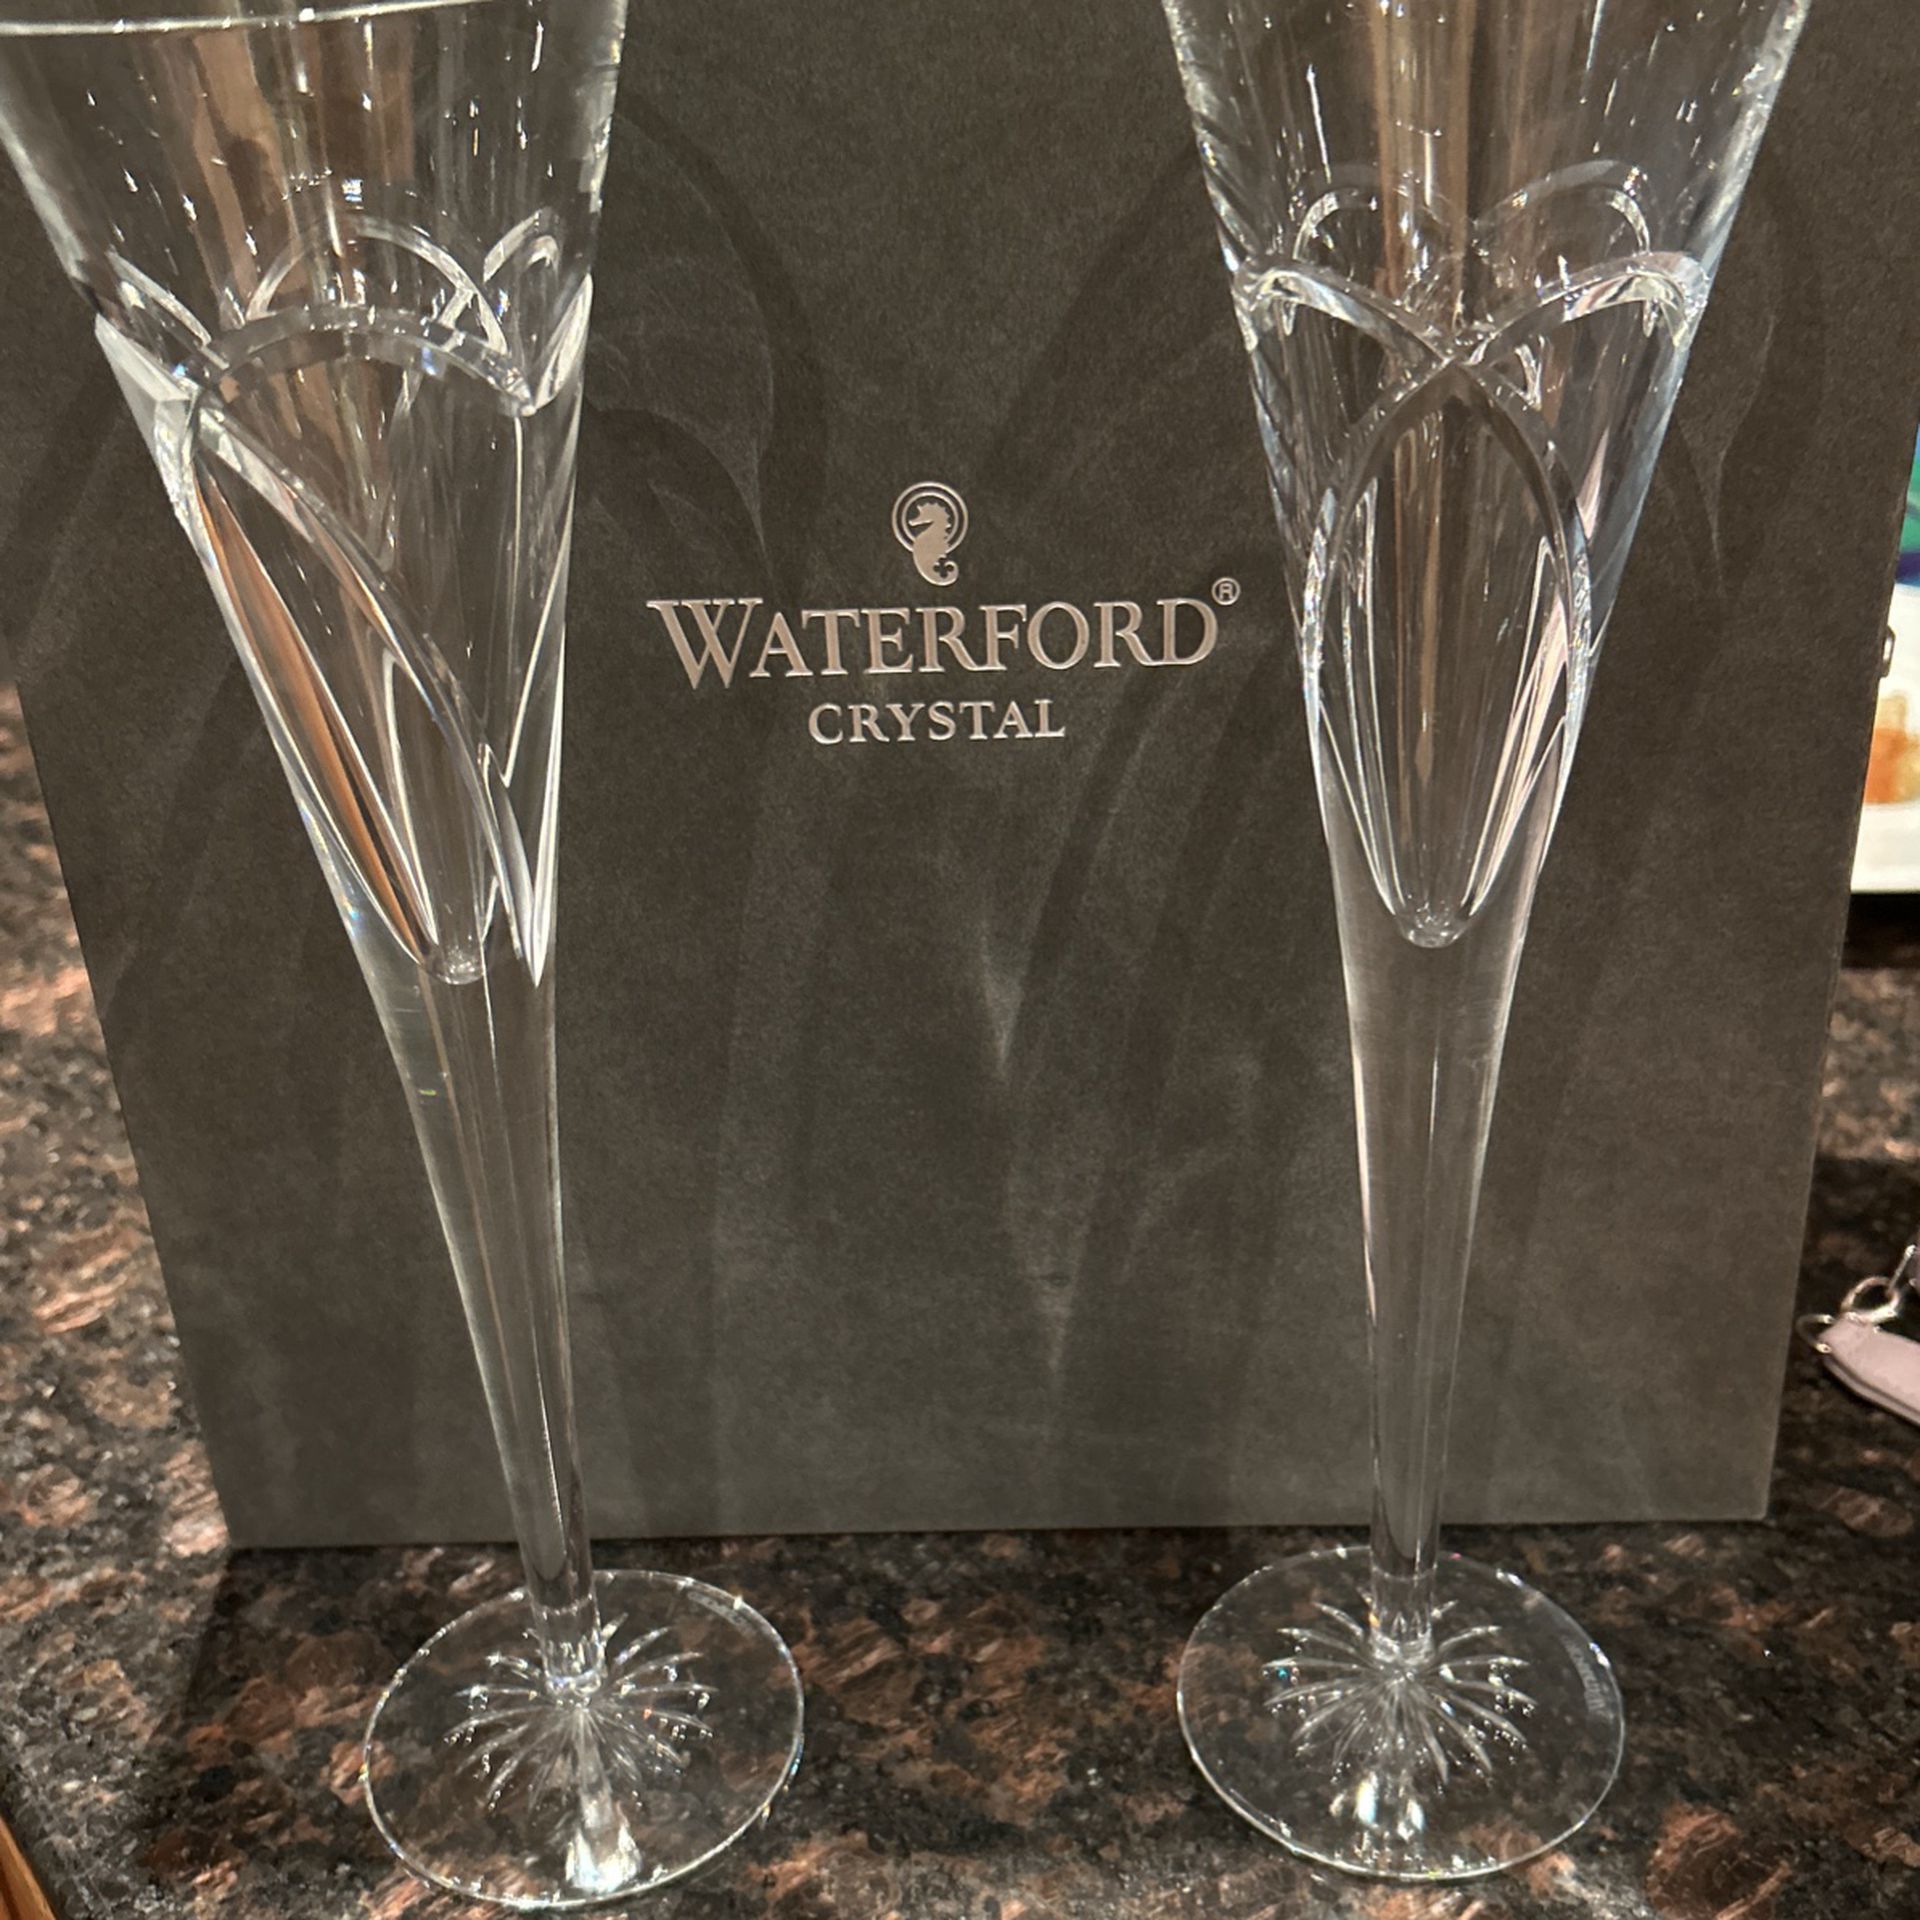 Waterford Champagne Flutes In Original Packaging